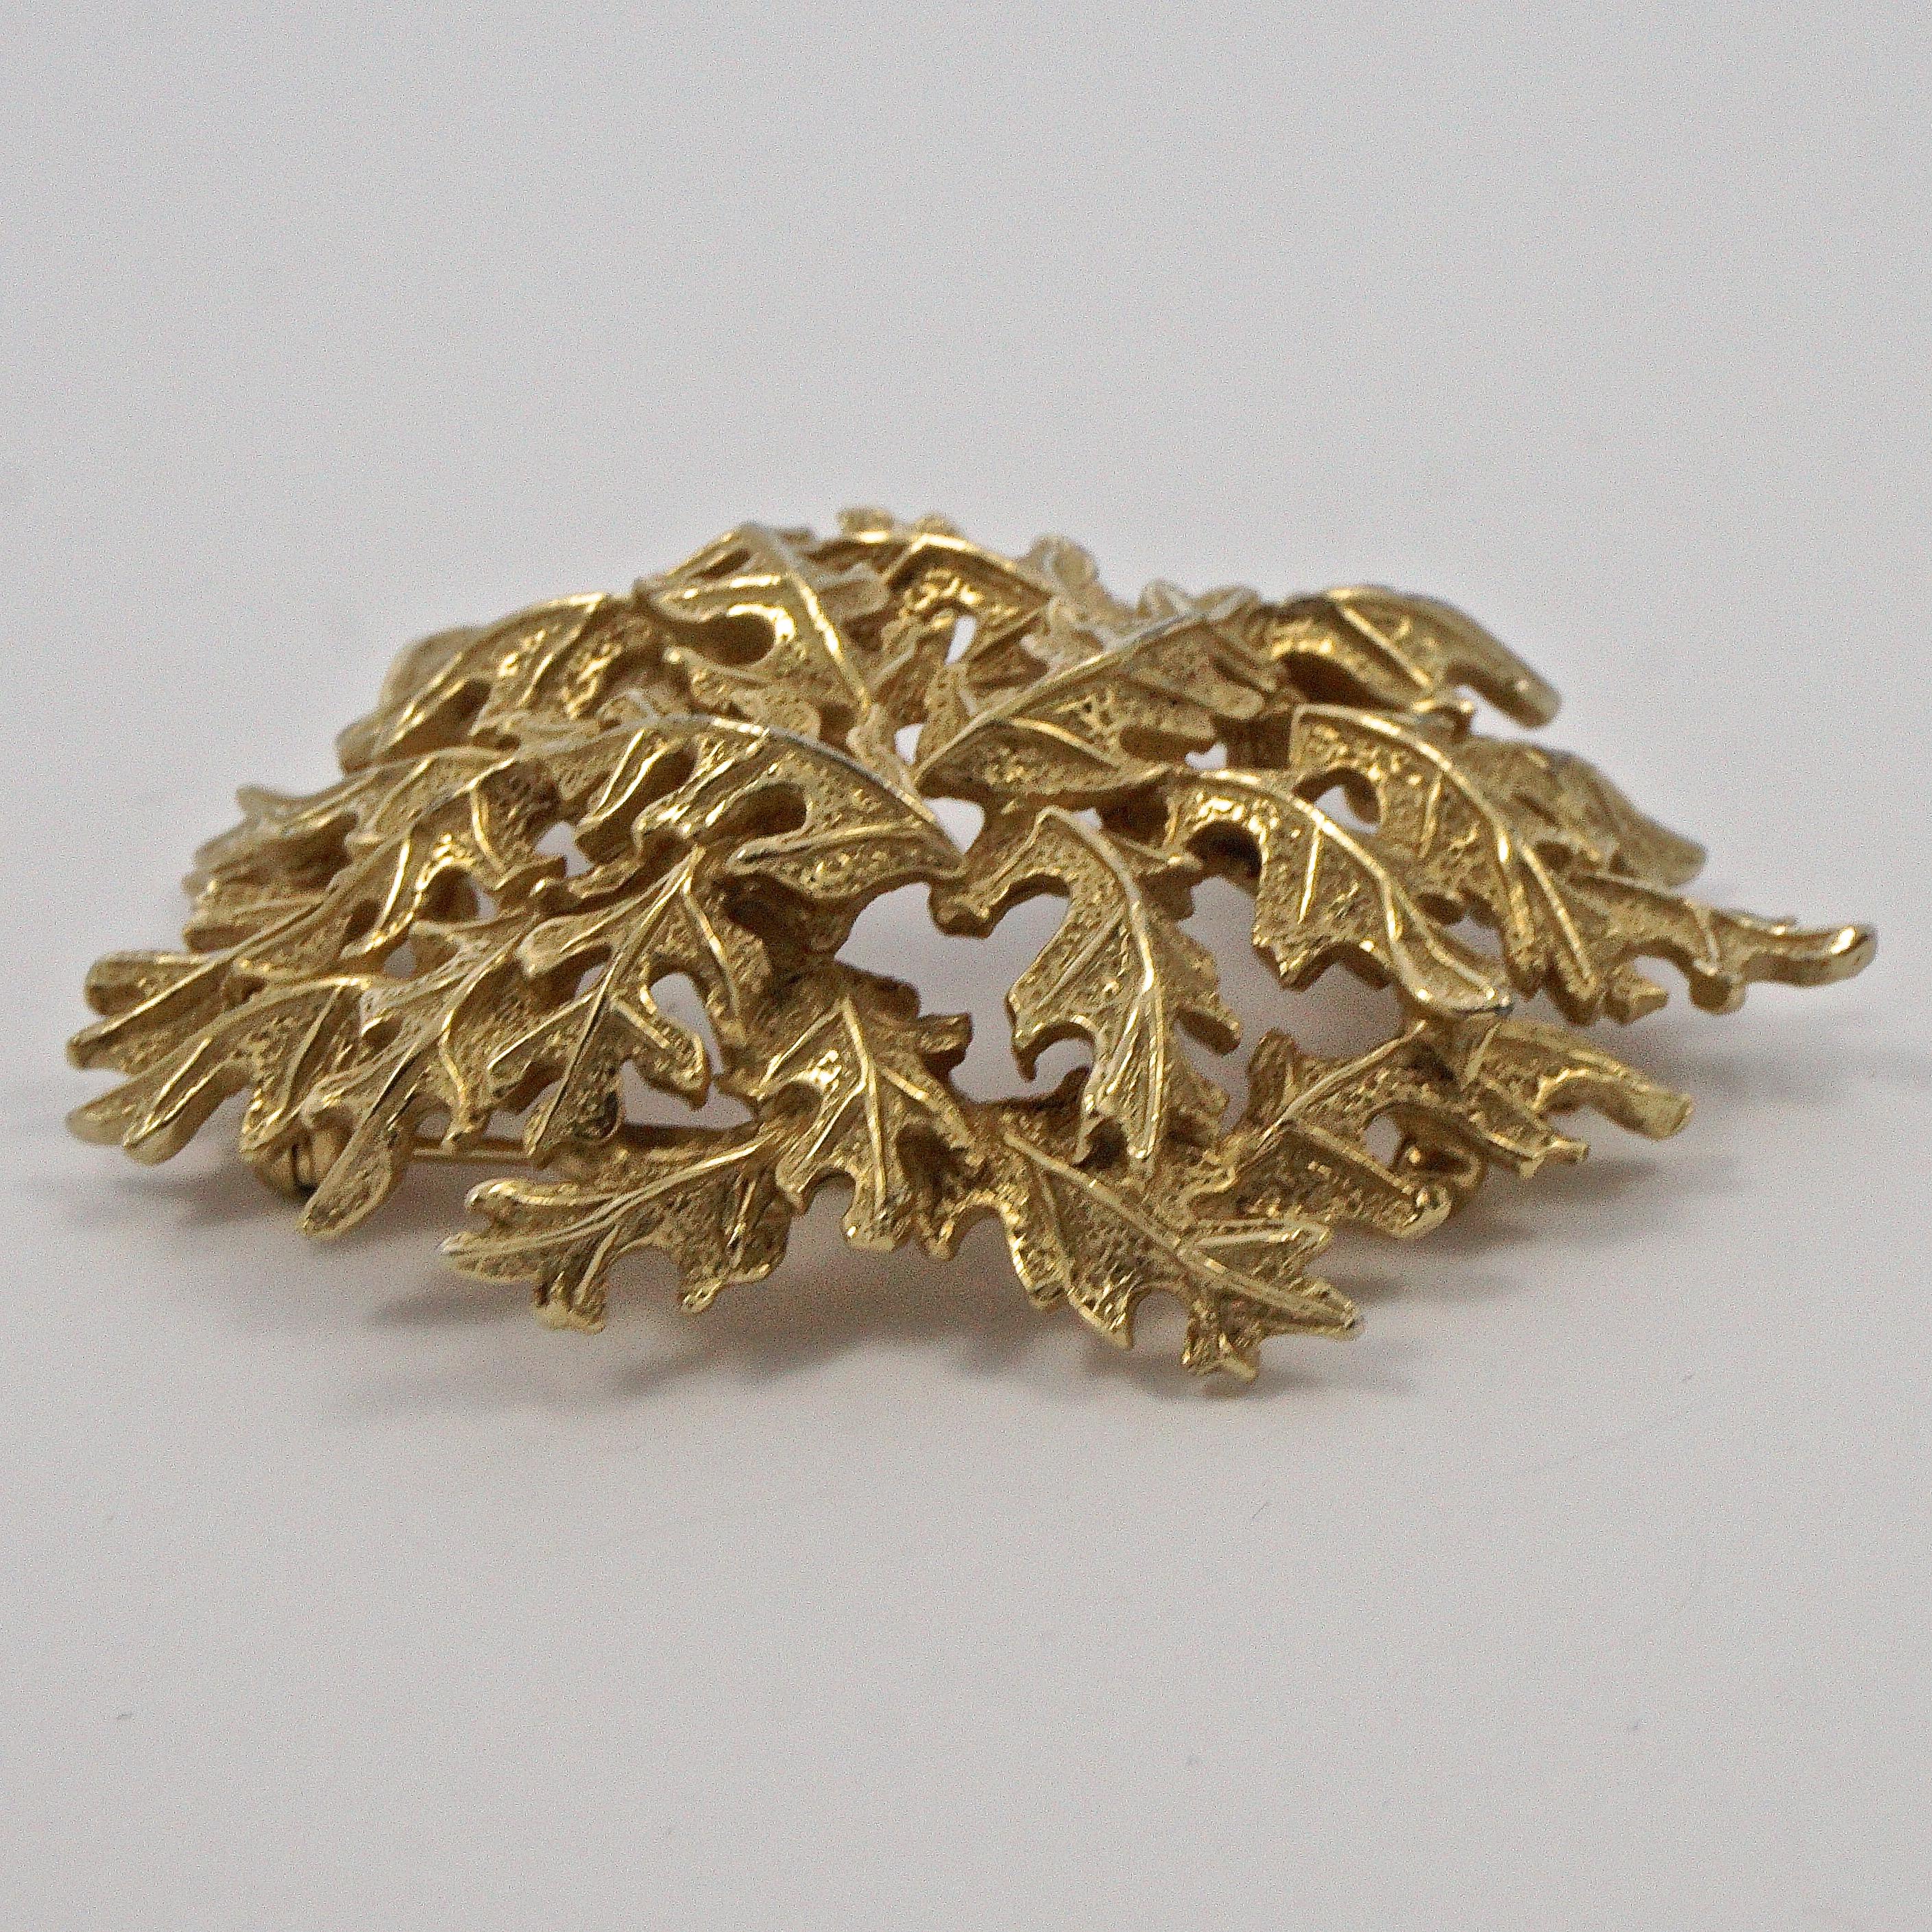 Castlecliff Gold Plated Leaves Statement Brooch 2